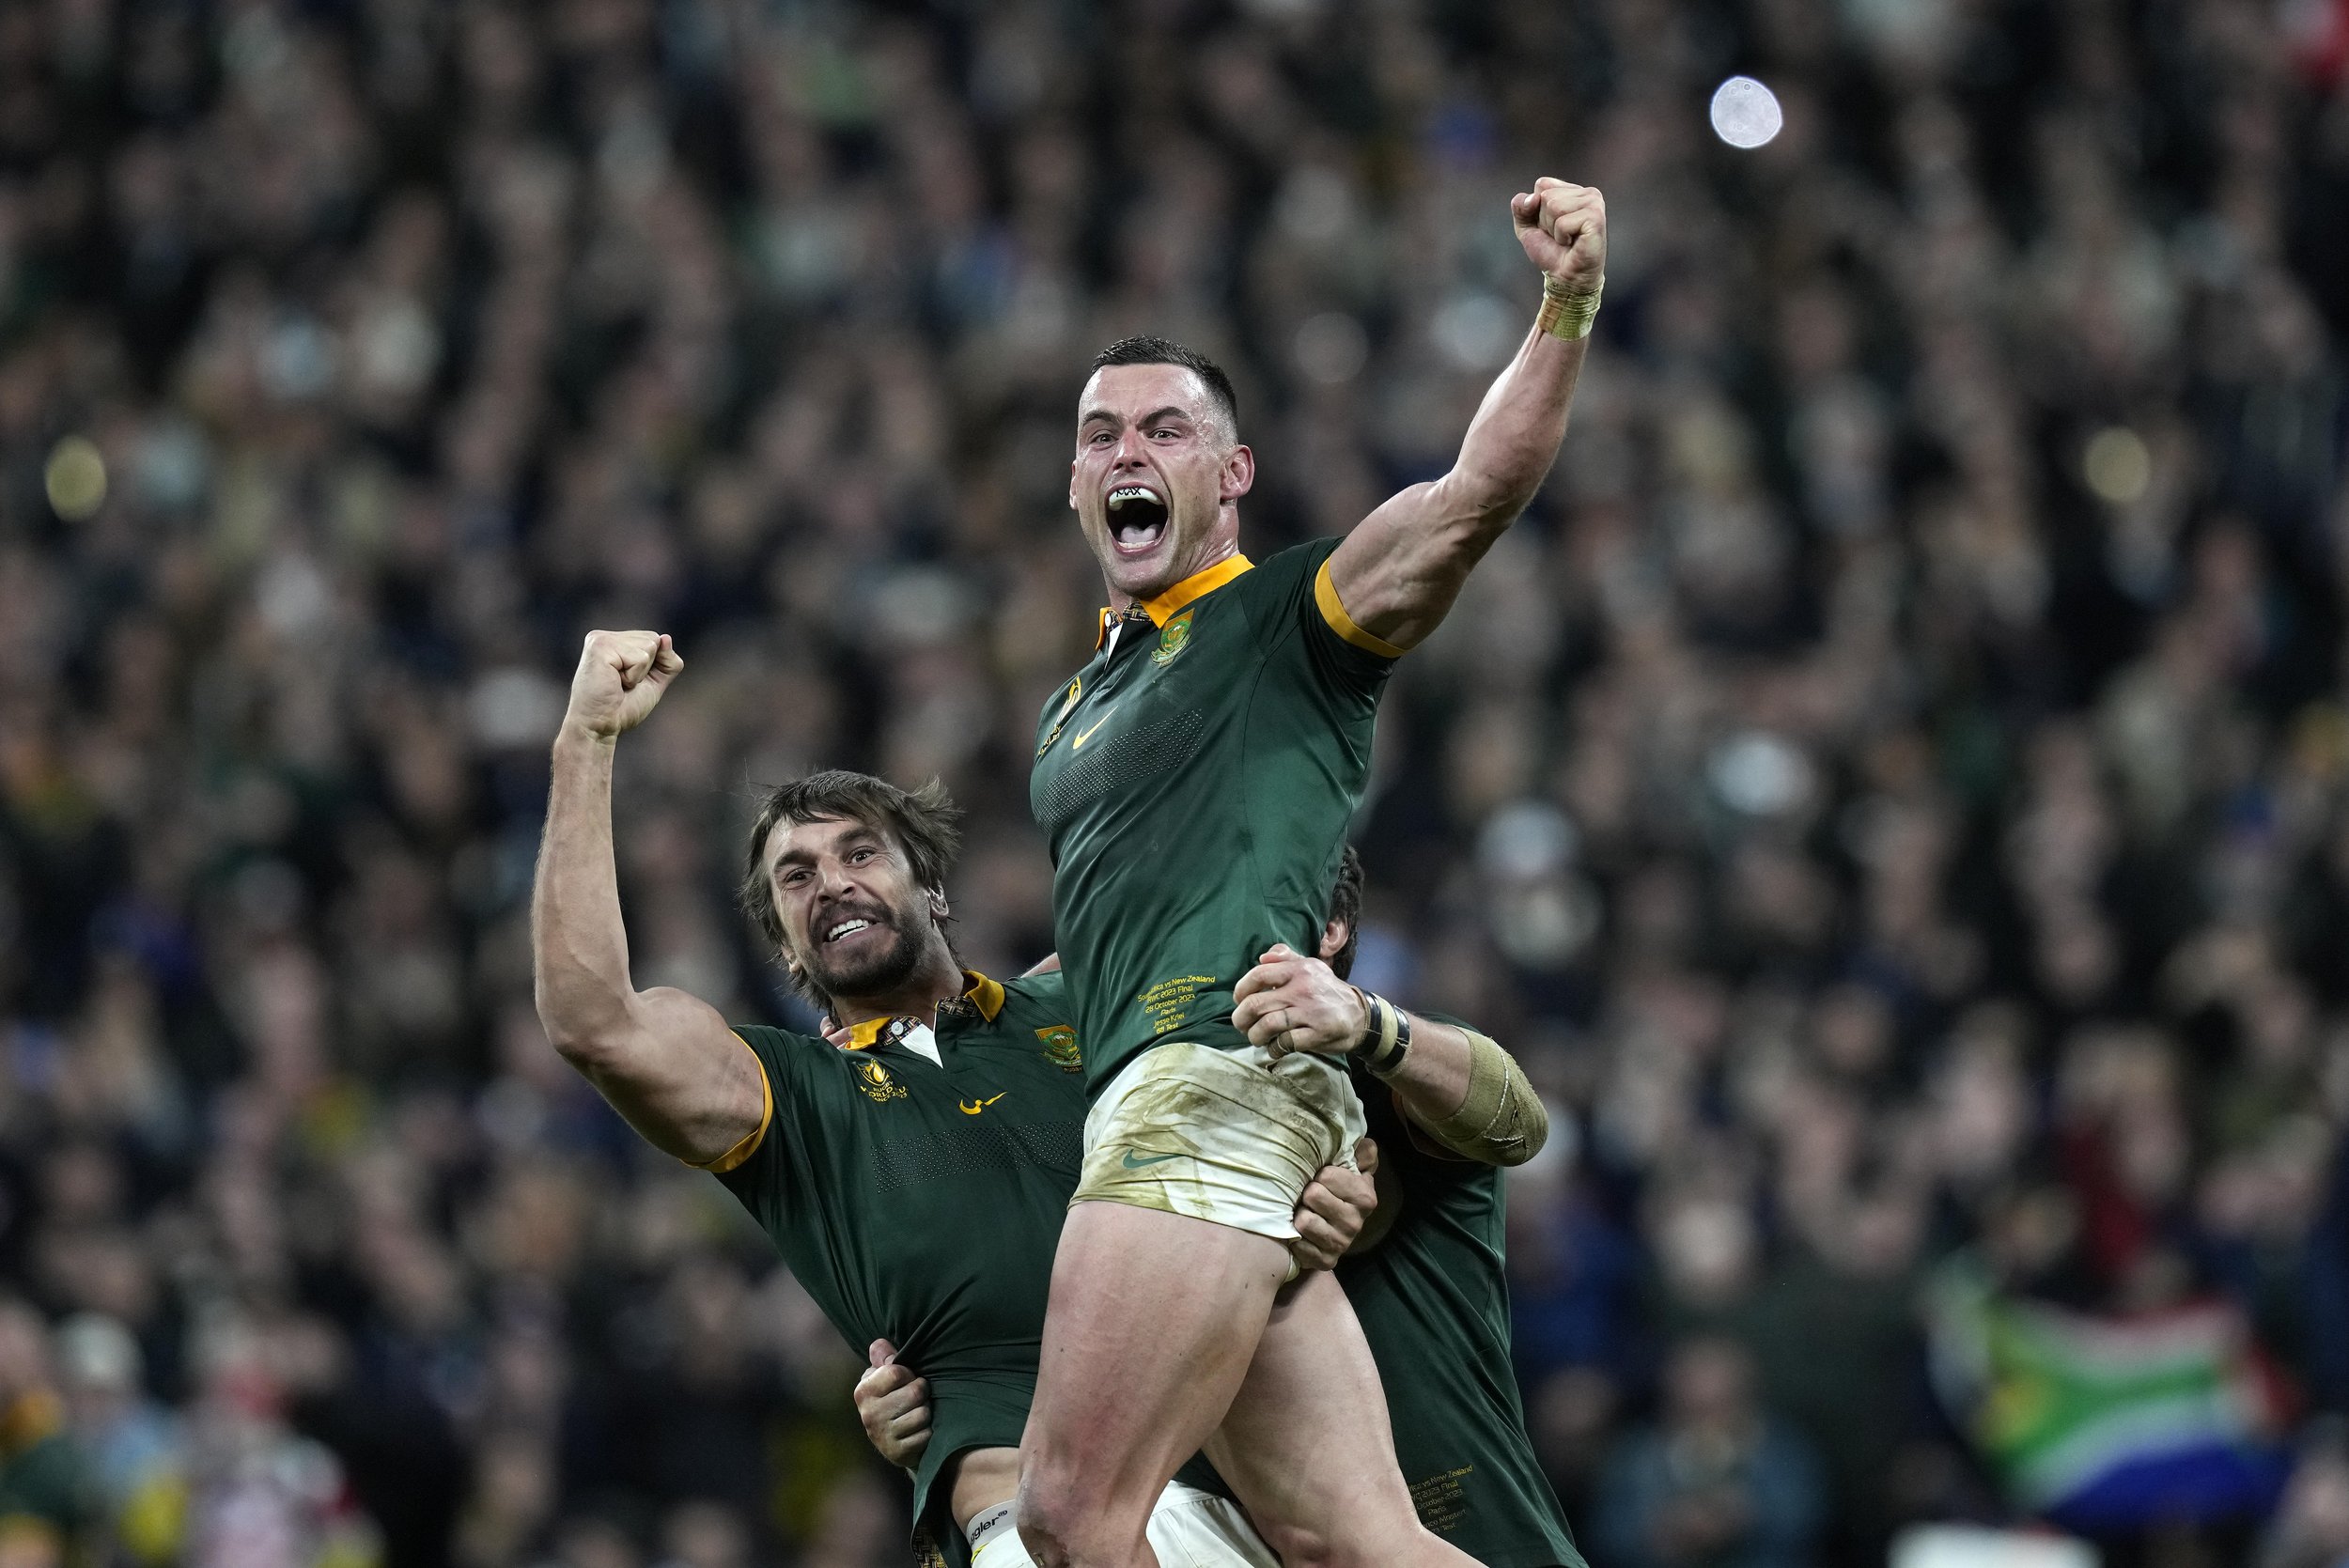  South Africa's Jesse Kriel, right, and Eben Etzebeth celebrate after winning the Rugby World Cup final match against New Zealand at the Stade de France in Saint-Denis, near Paris, on Oct. 28, 2023. (AP Photo/Thibault Camus) 